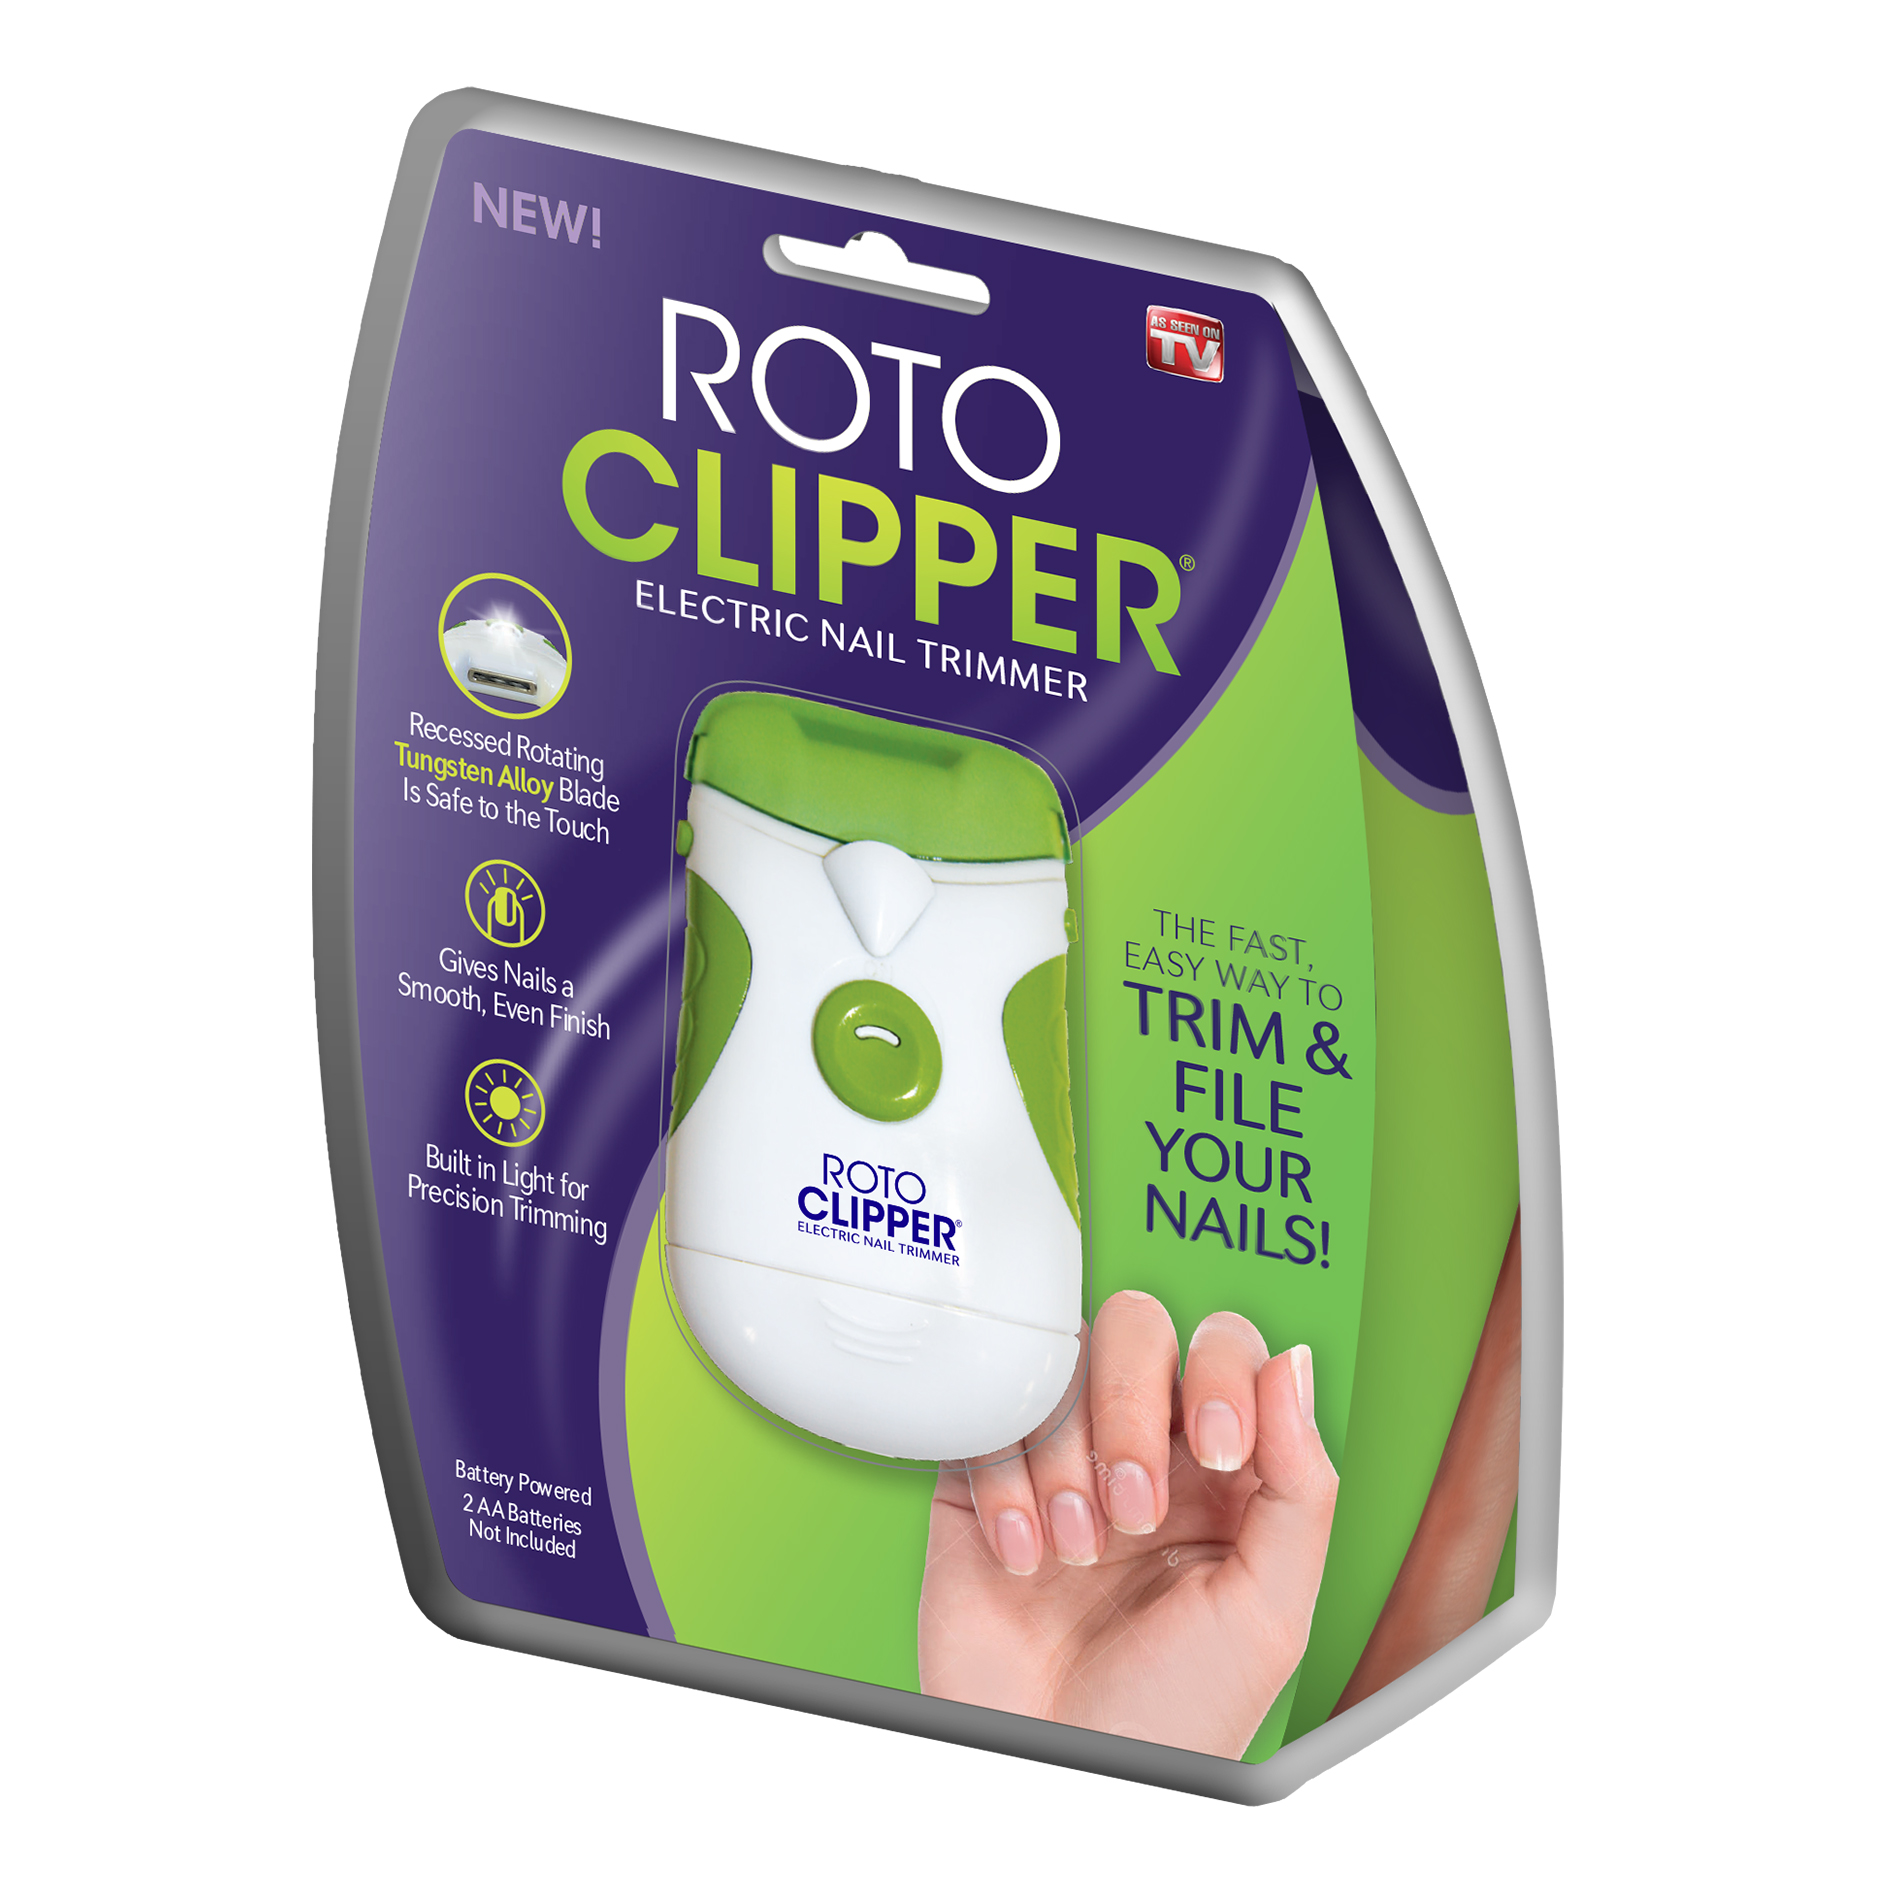 As Seen On TV Roto Clipper Electric Nail Trimmer